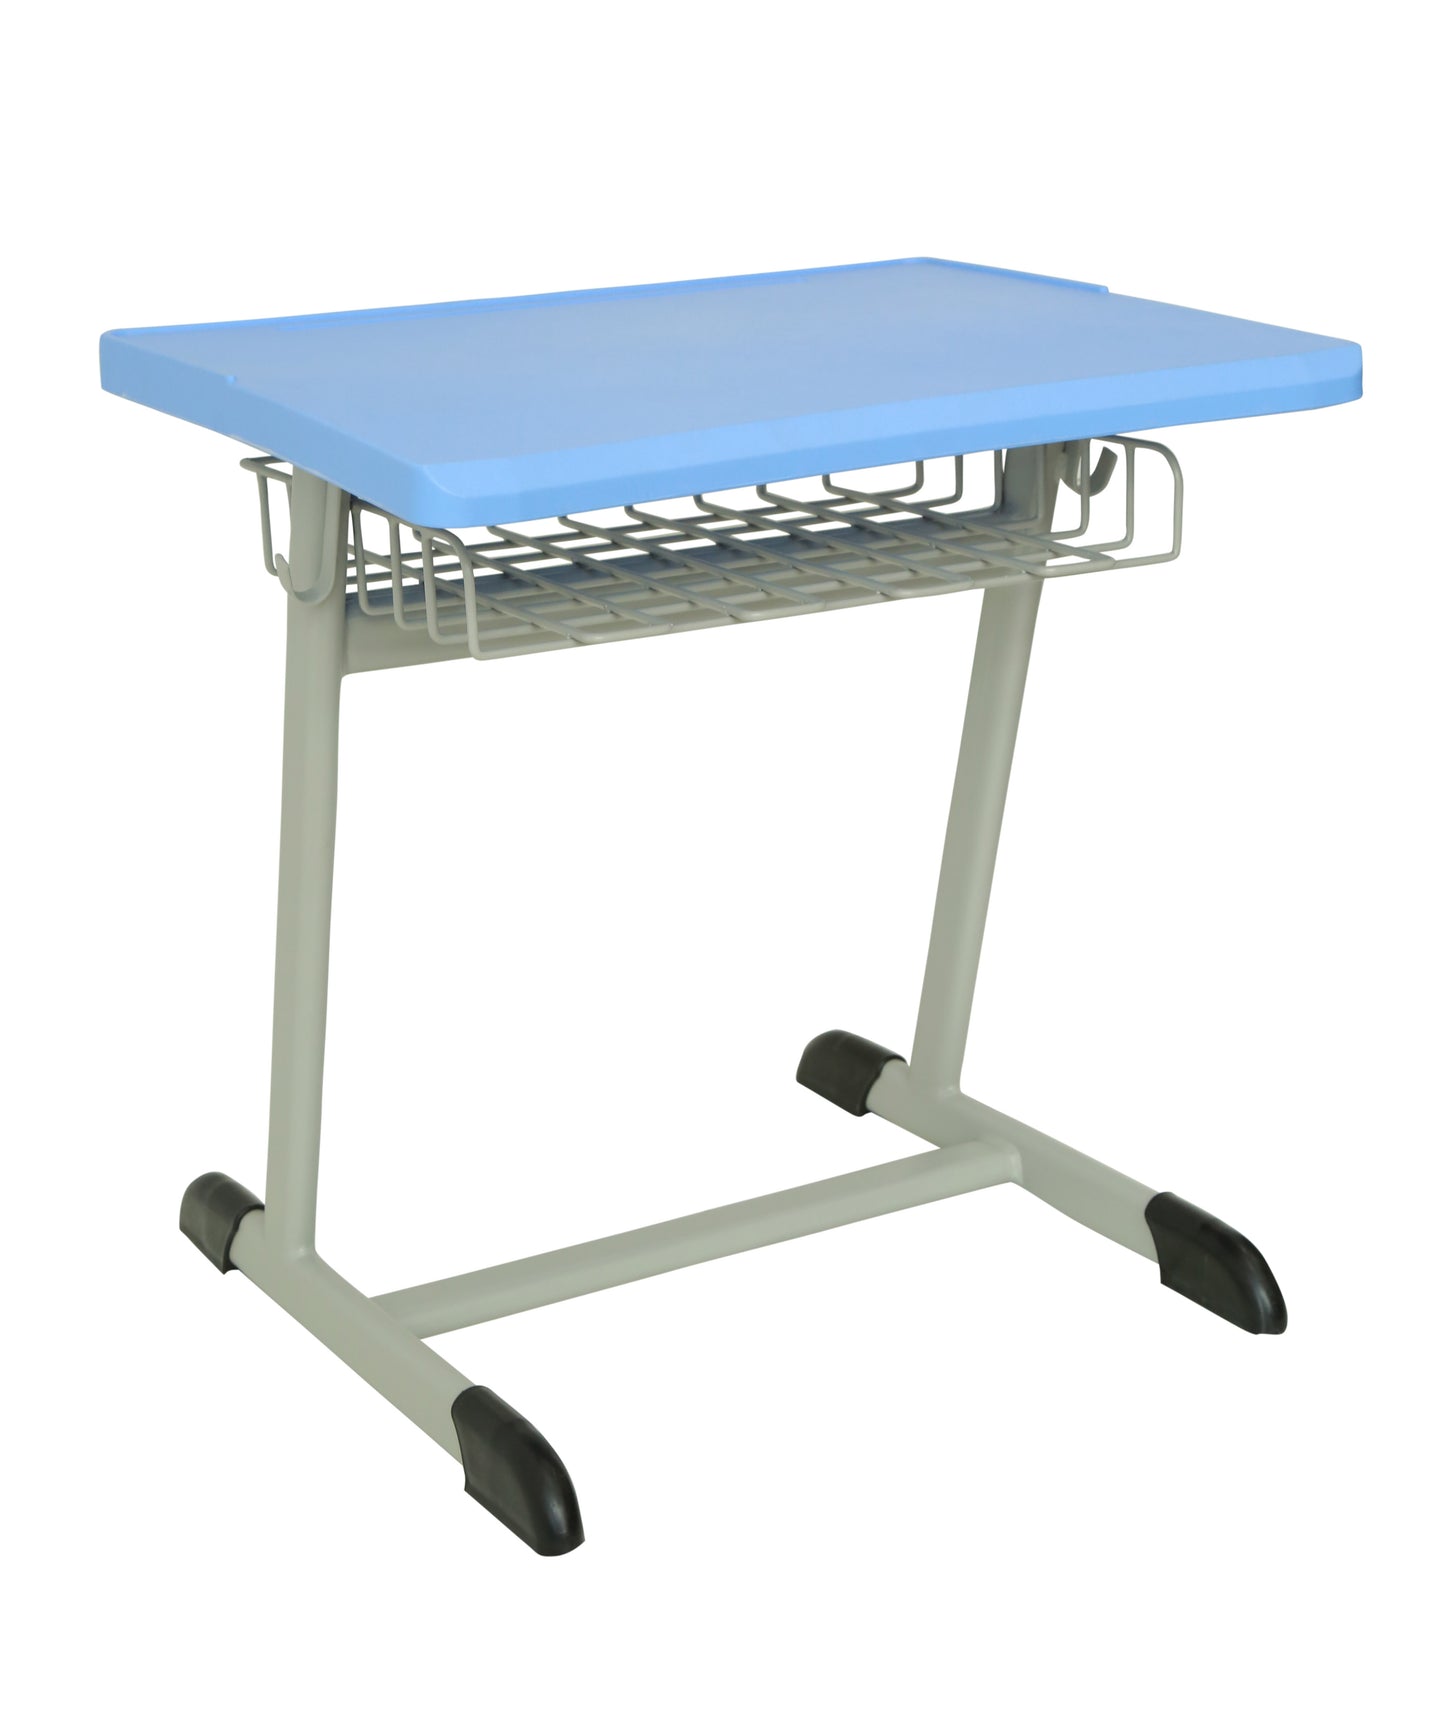 MT-804 Injection Moulded Face Cover of Student Table